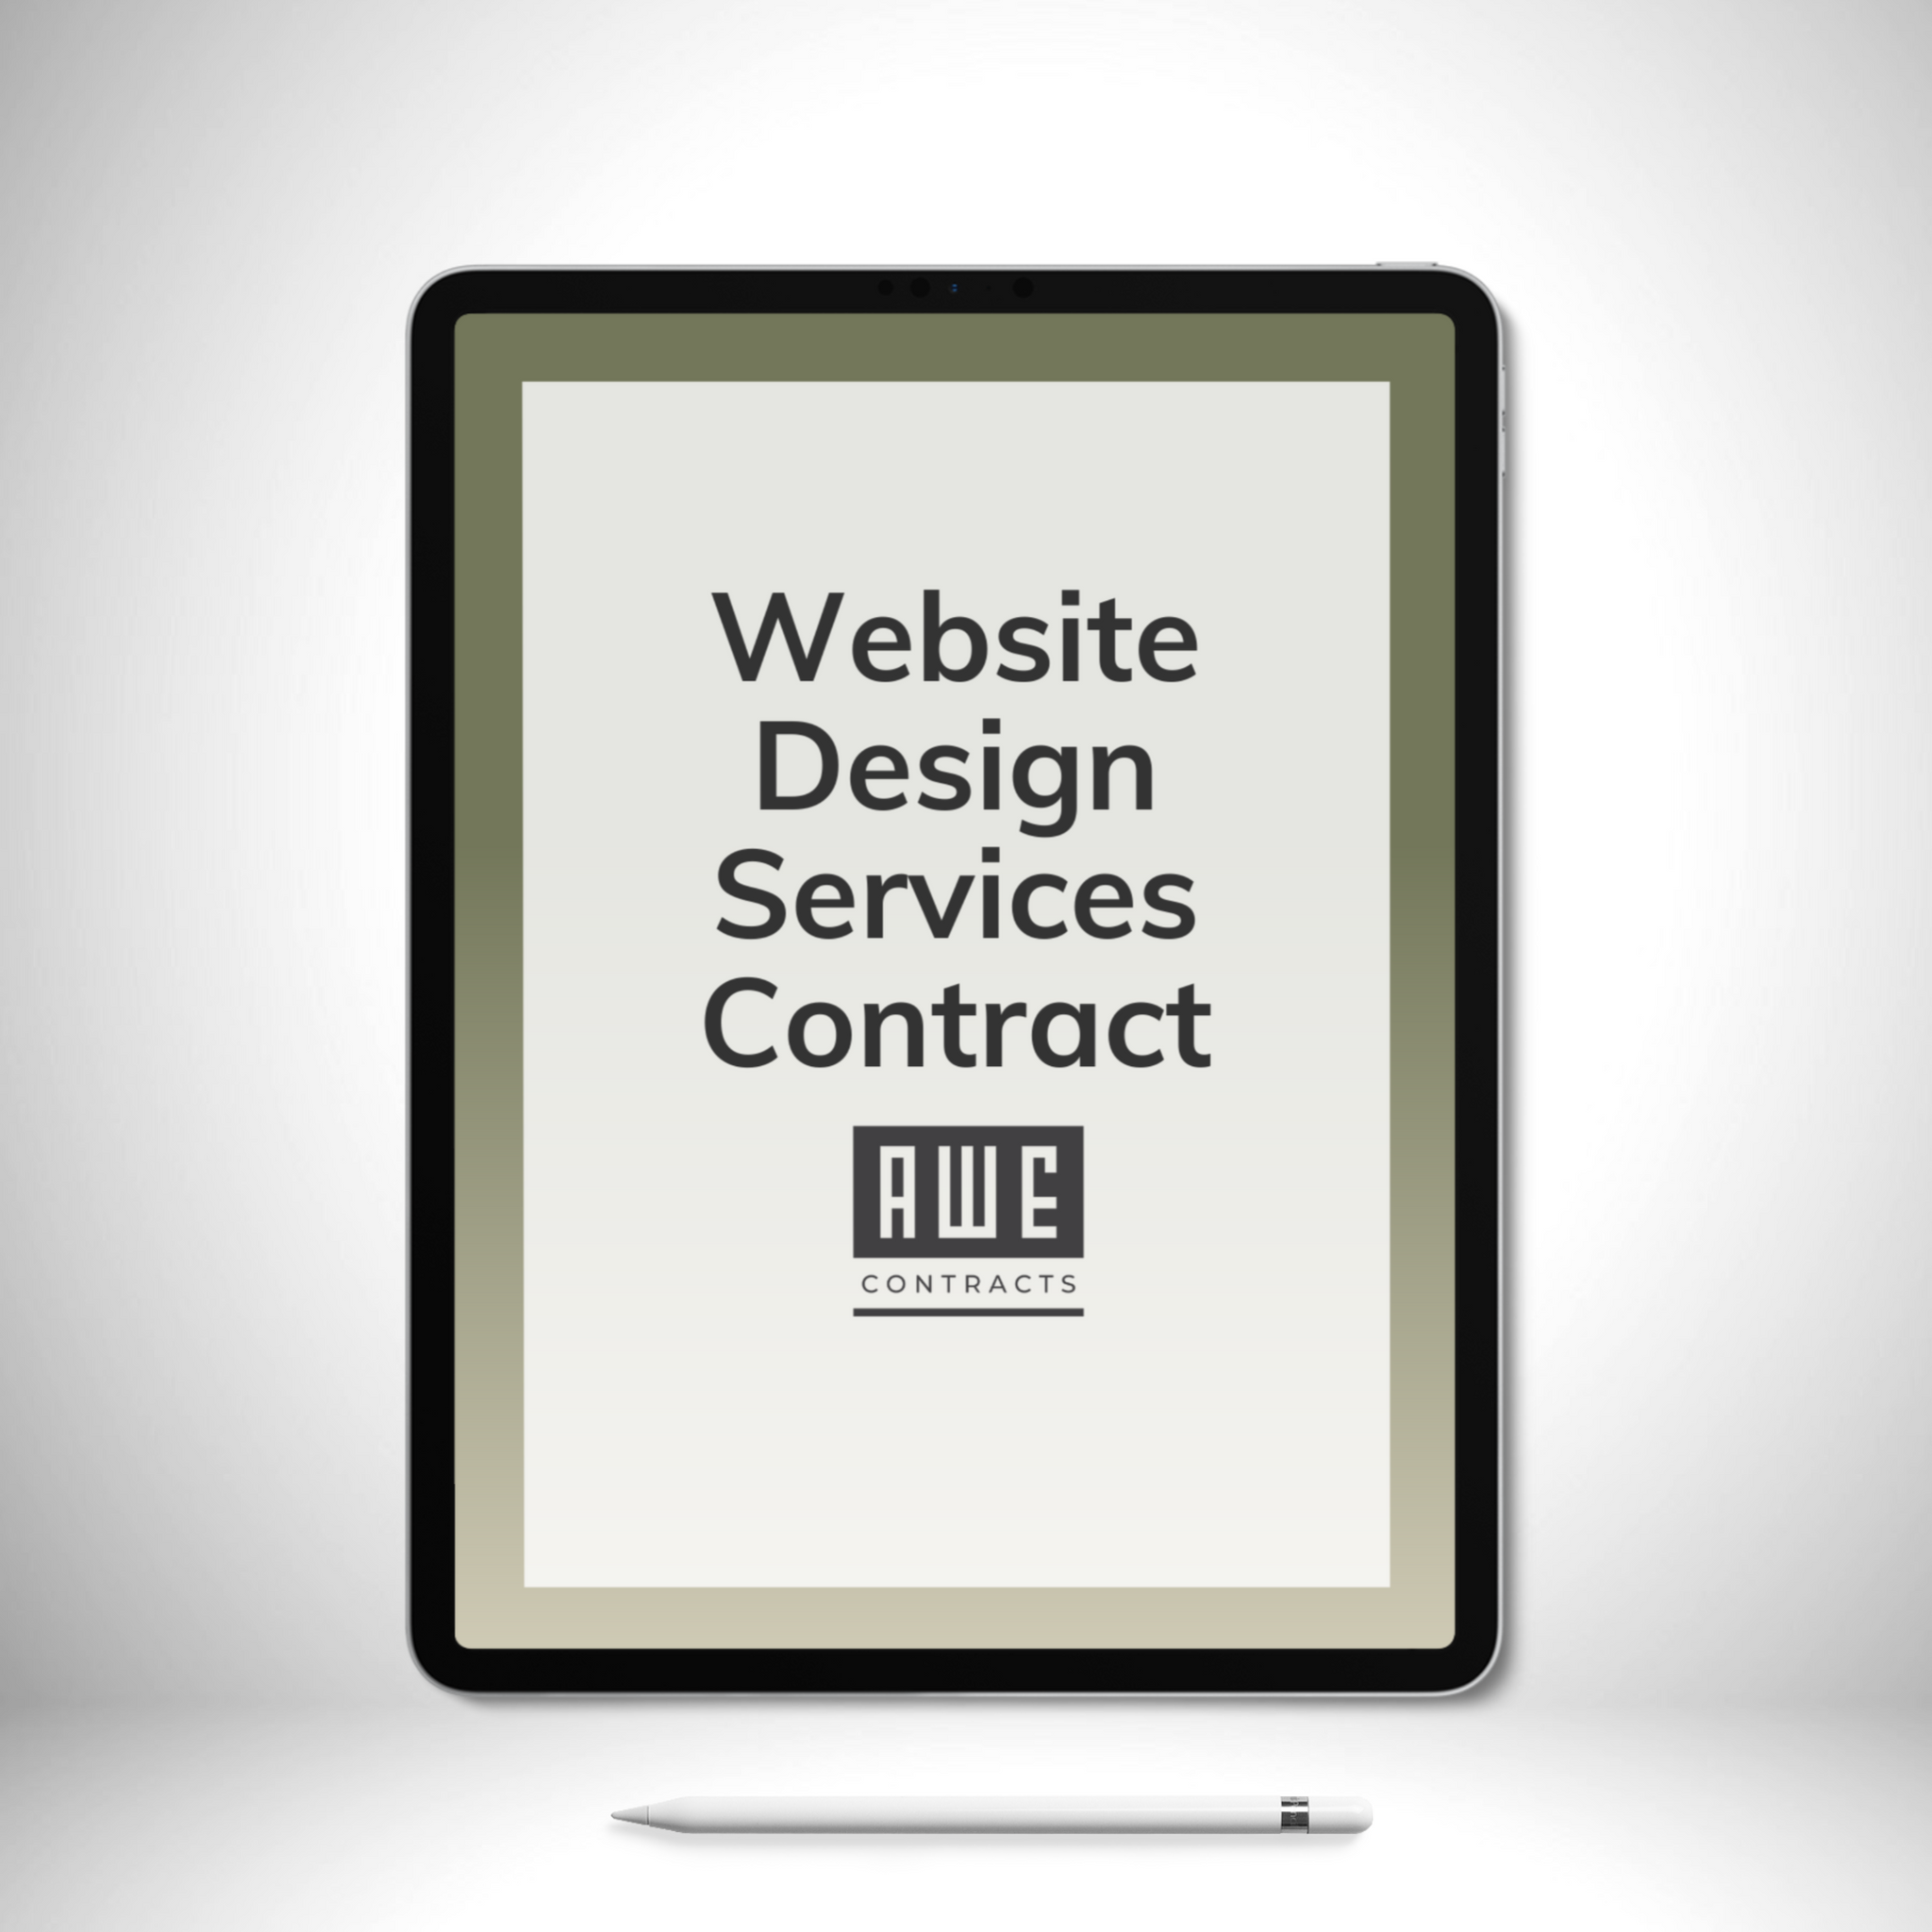 Website Design Services Contract